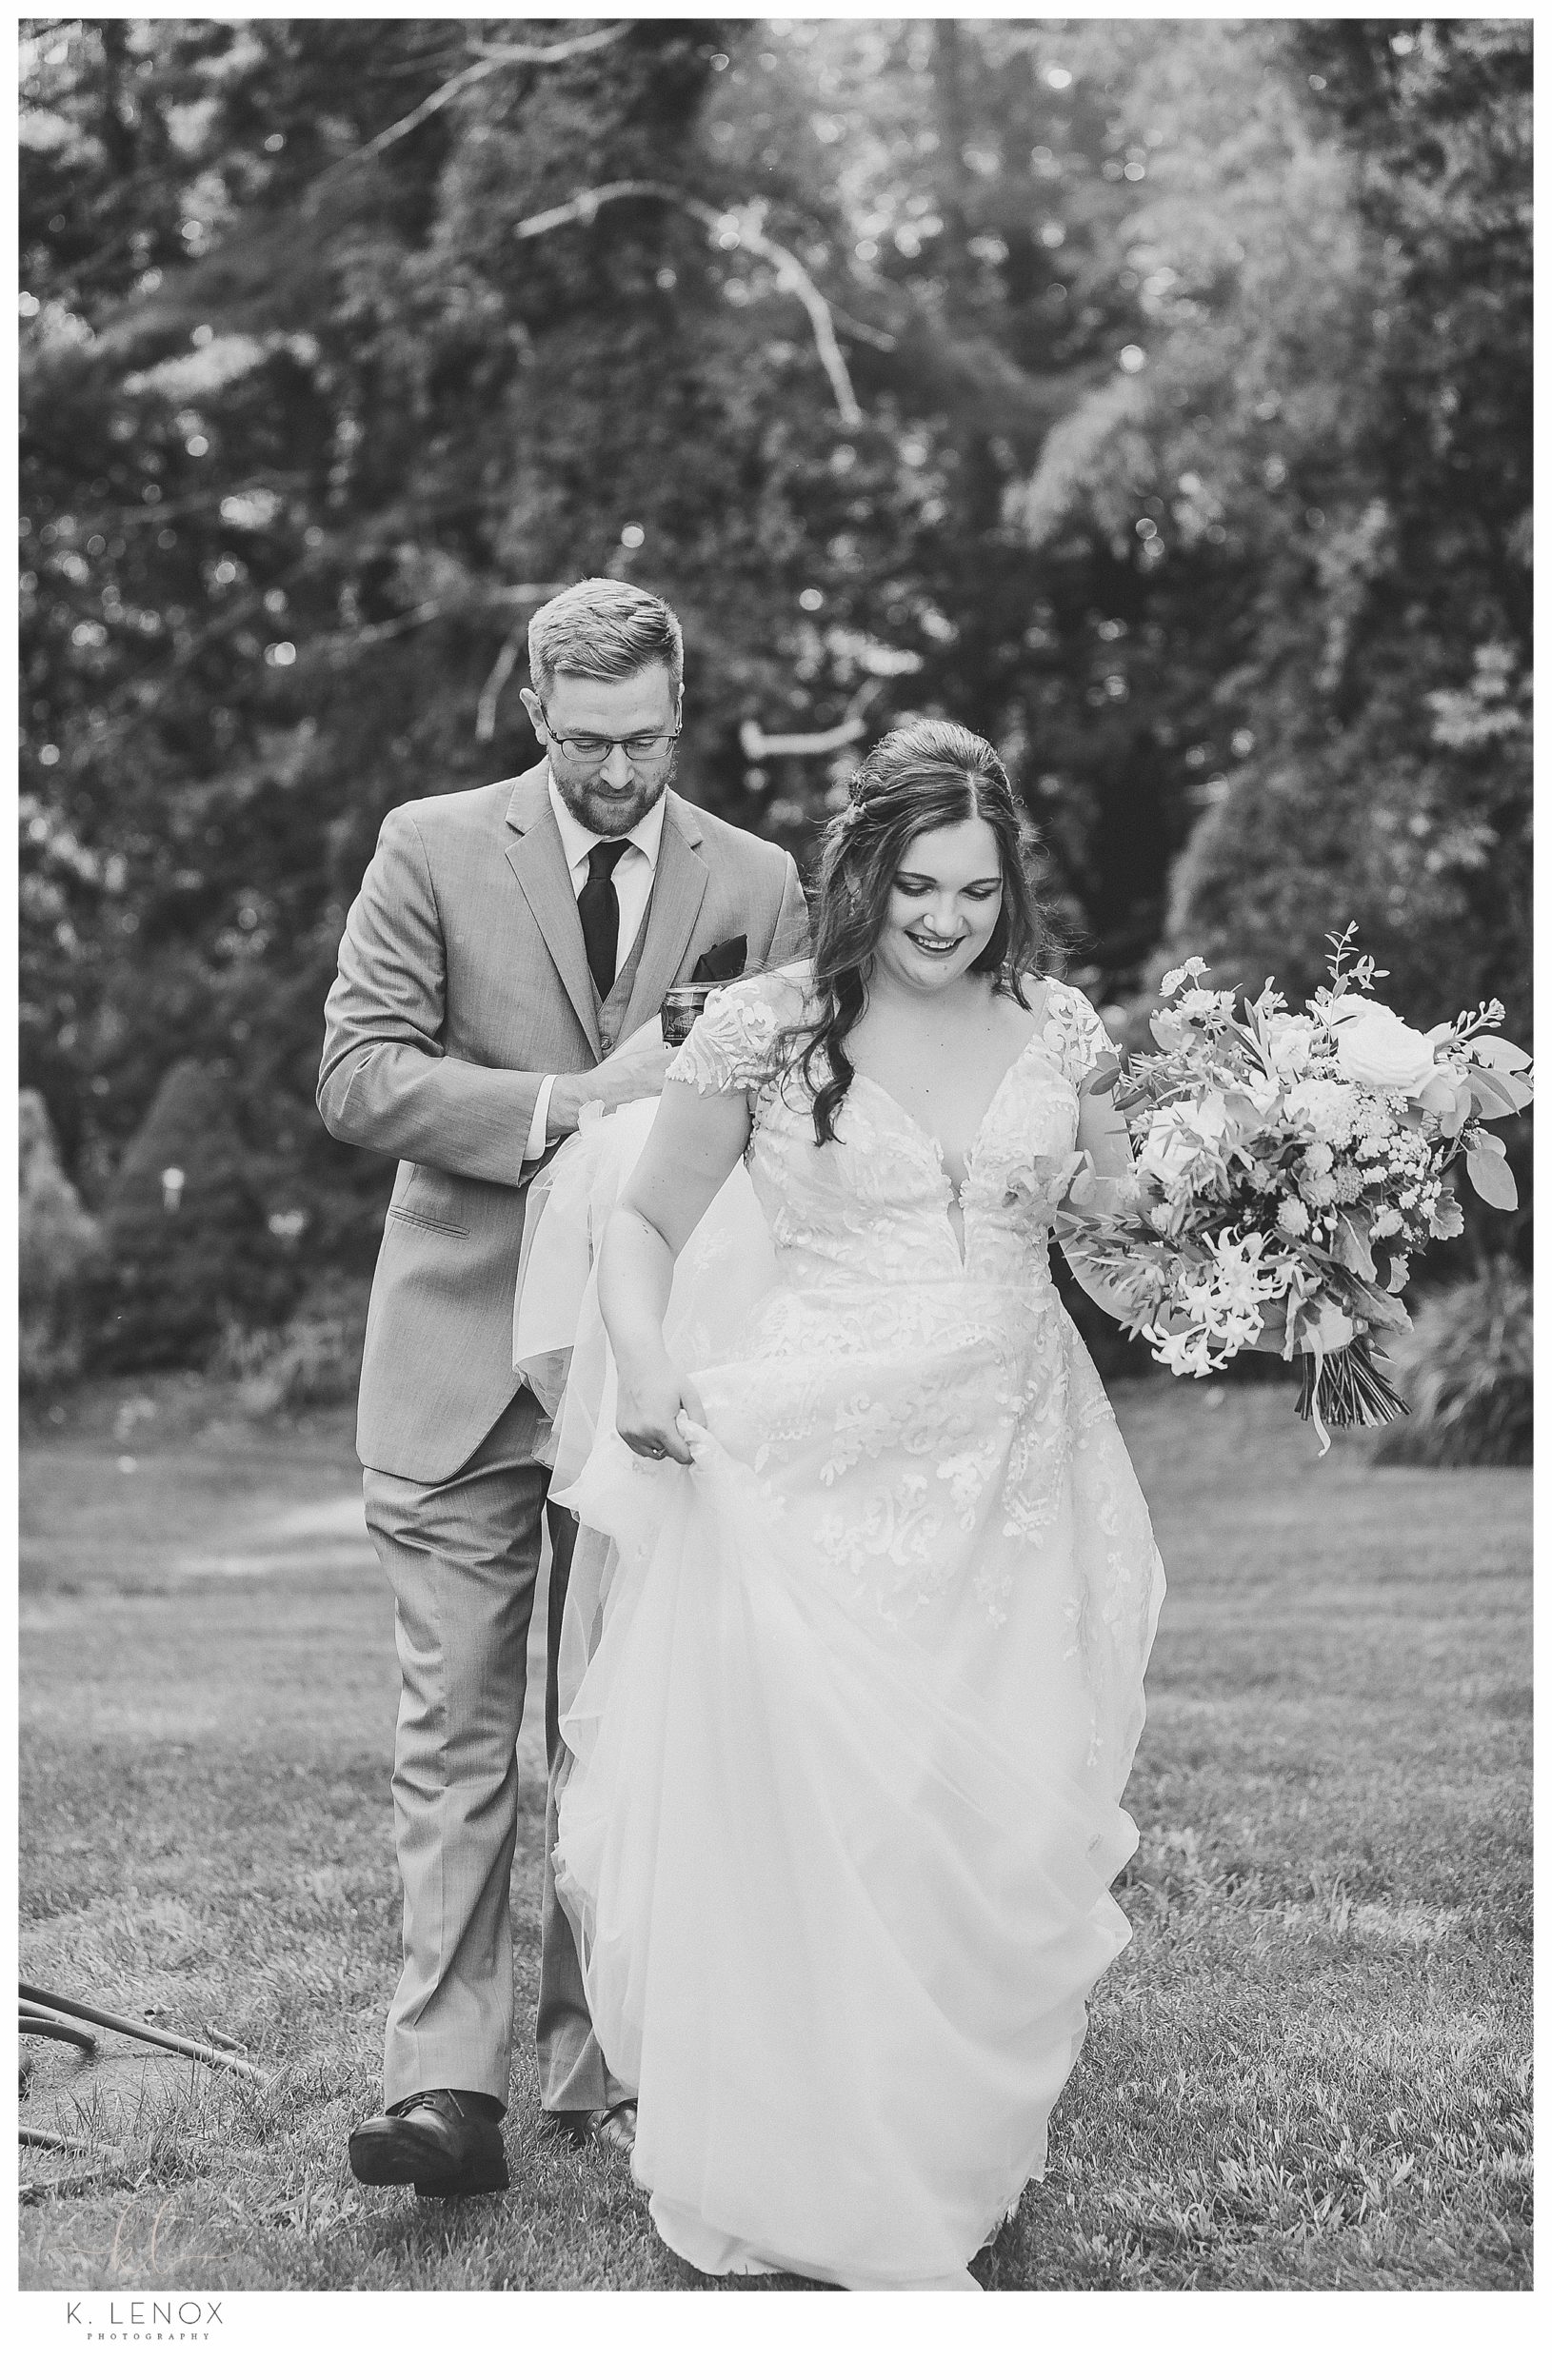 Summer Wedding at the Bedford Village Inn- Black and White photo of a bride and groom walking. 